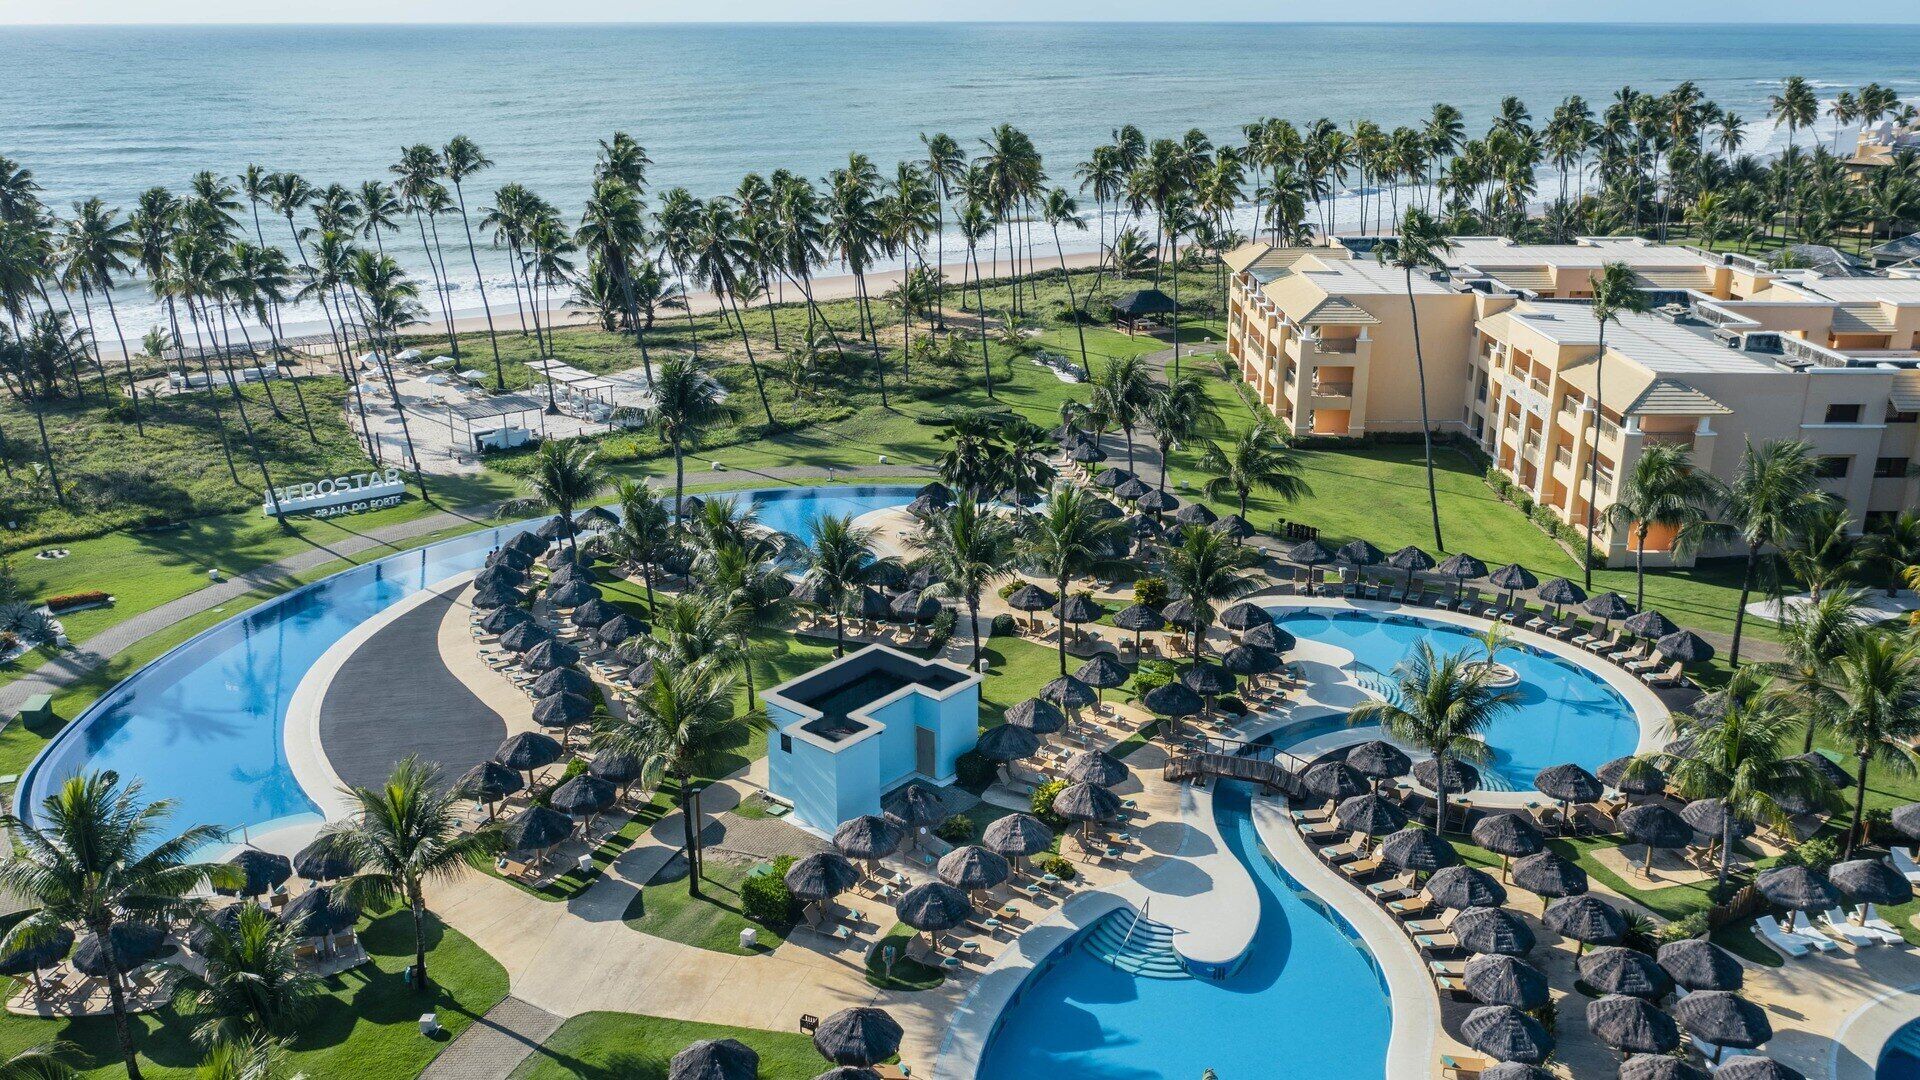 Top 6 all-inclusive resorts in Brazil: from stunning beaches and golf courses to geothermal pools and island water trips